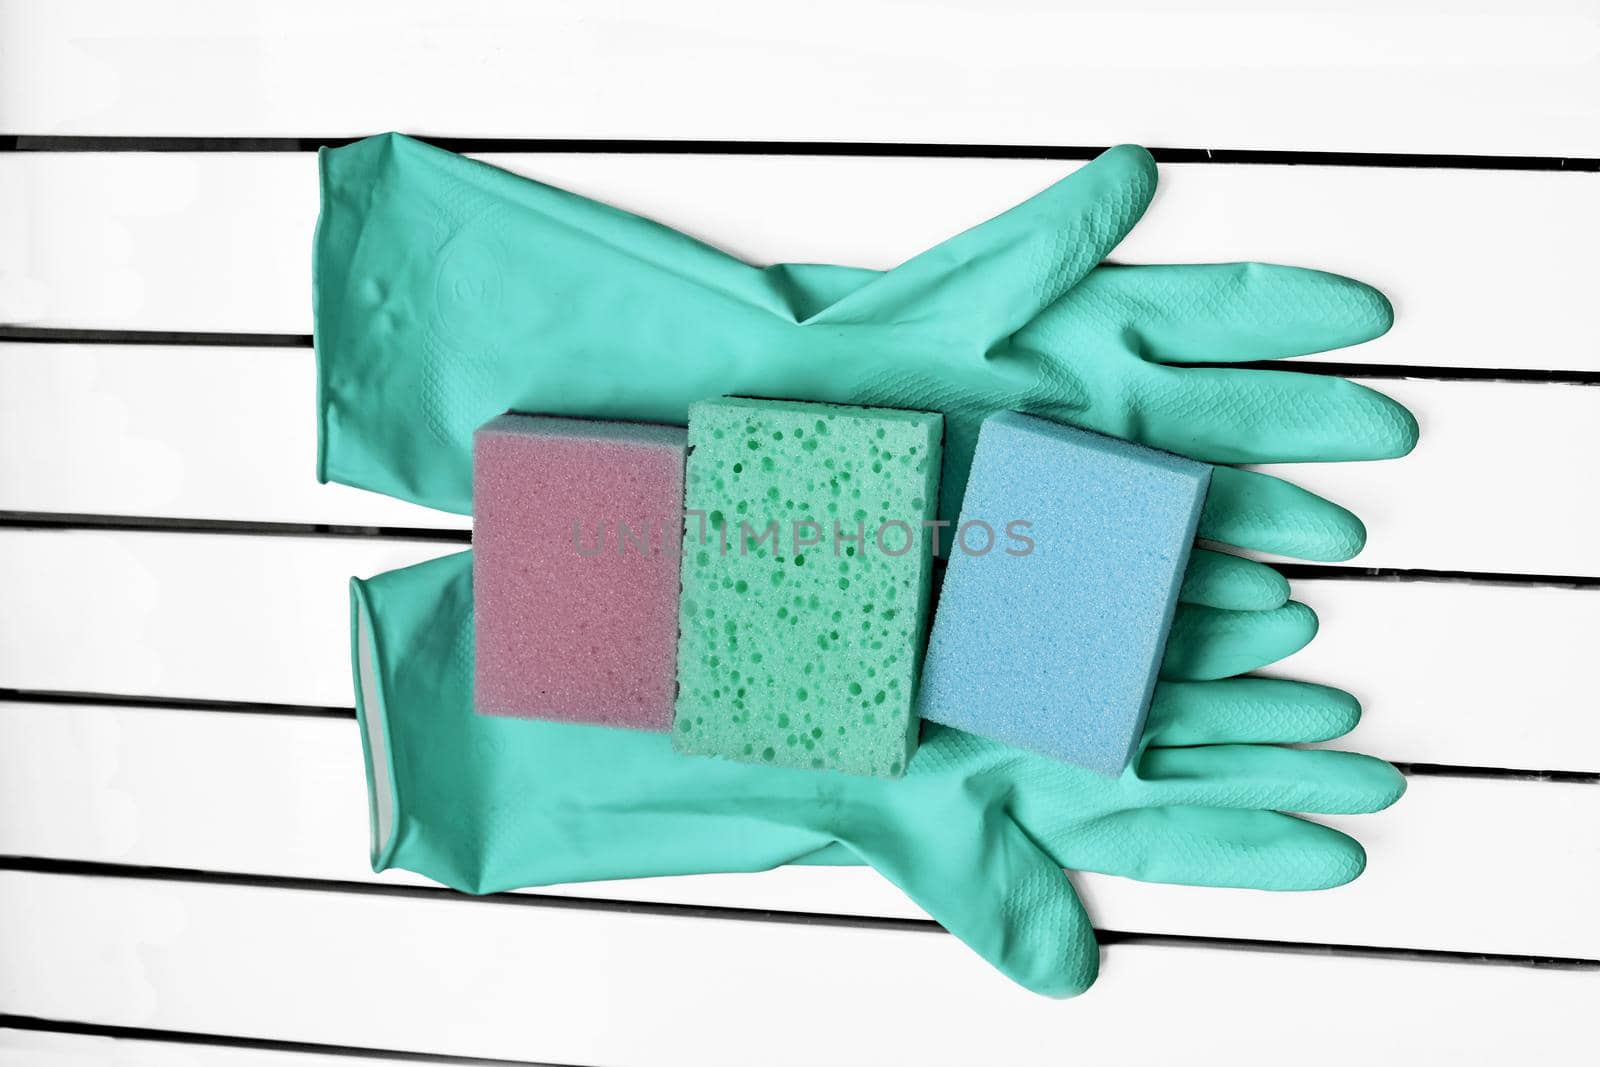 All purpose cleaning kit. Poison green rubber gloves and three synthetic sponges by jovani68